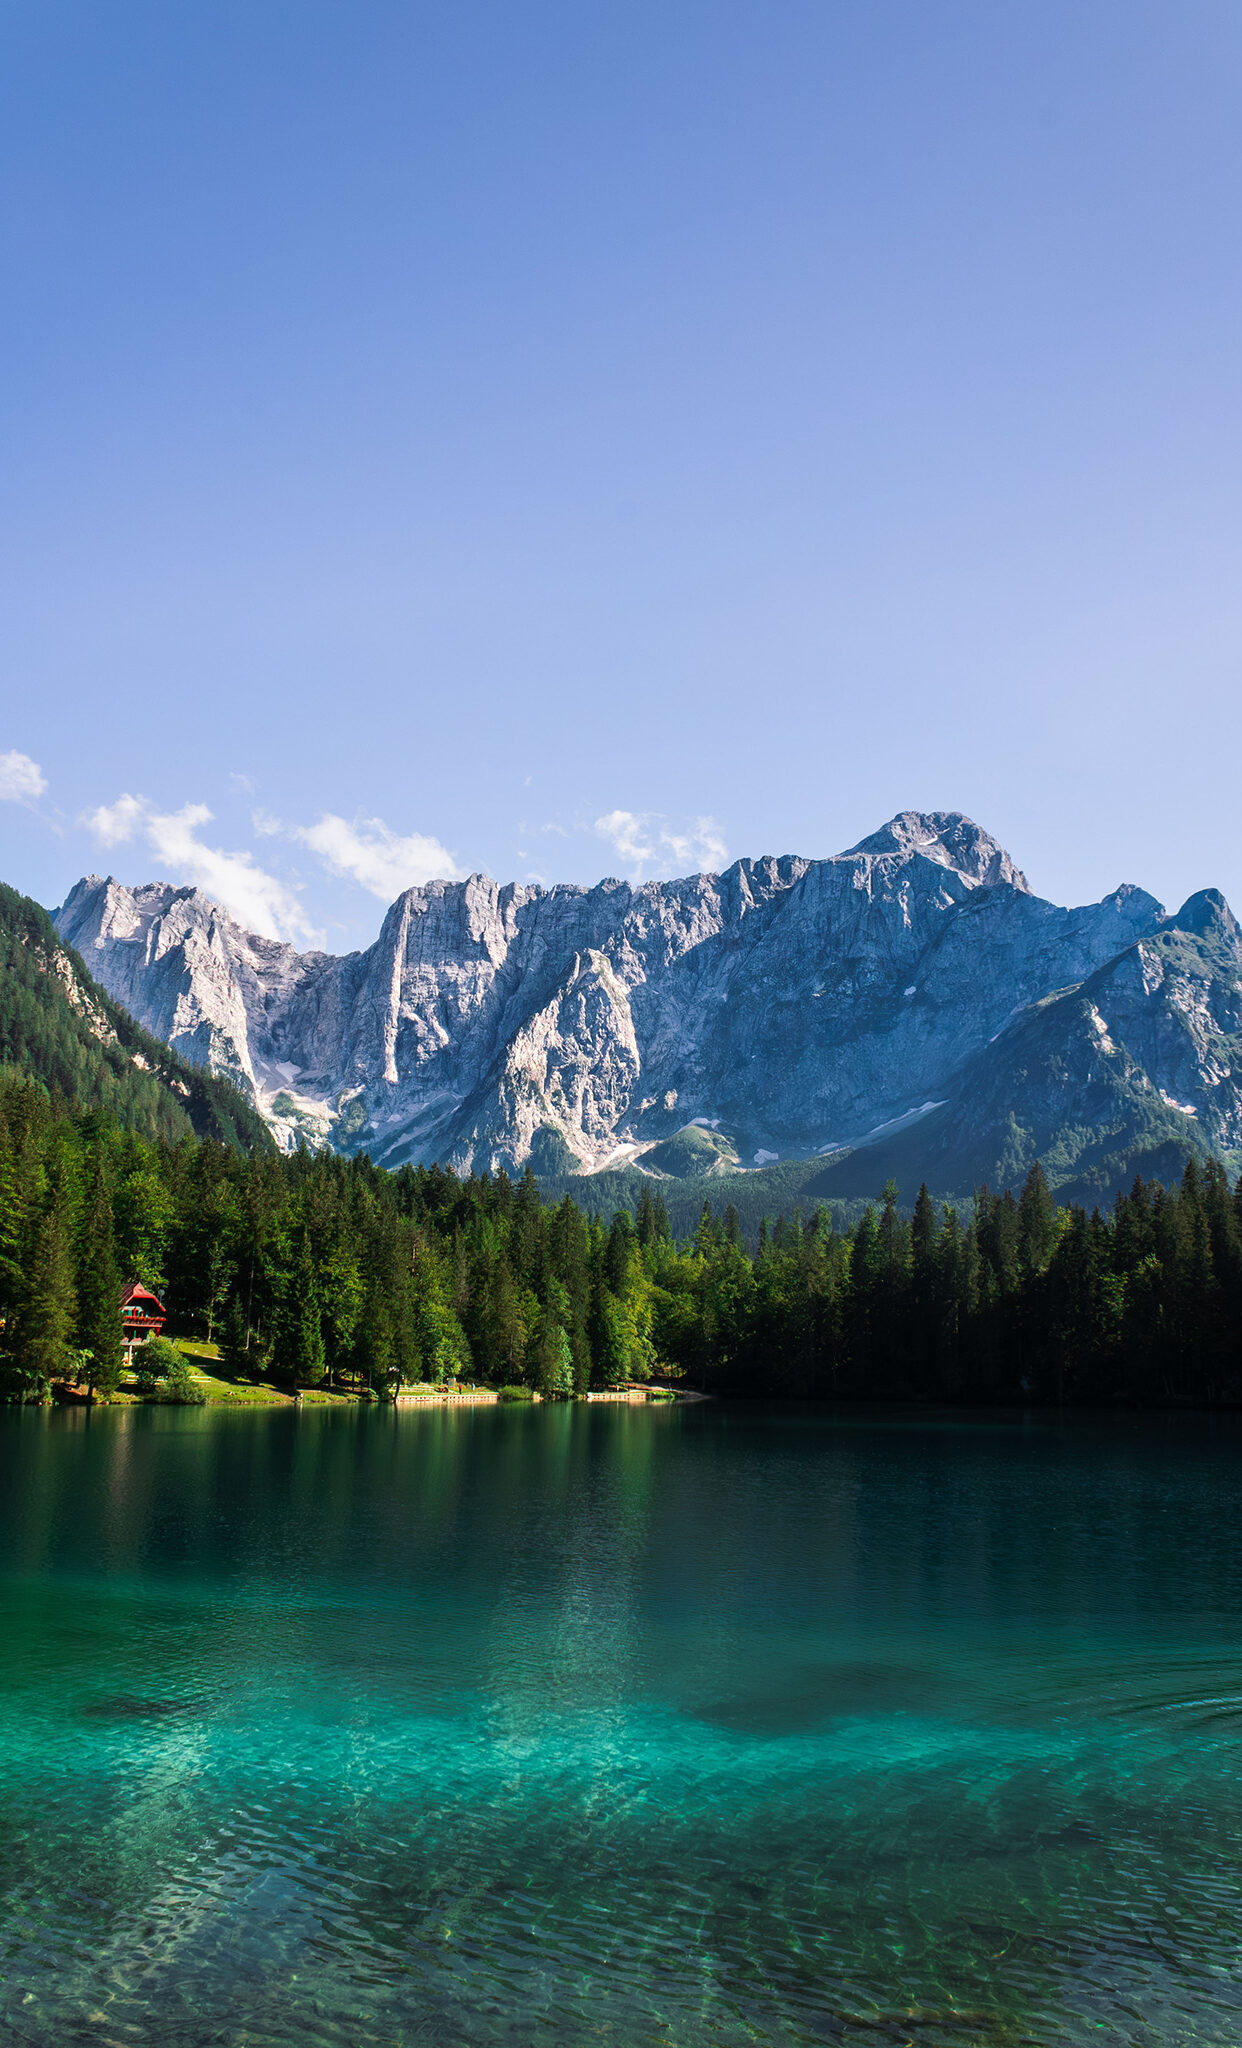 Above the electric blue waters of a still lake sit a forest at the base of the Italian Dolomites.